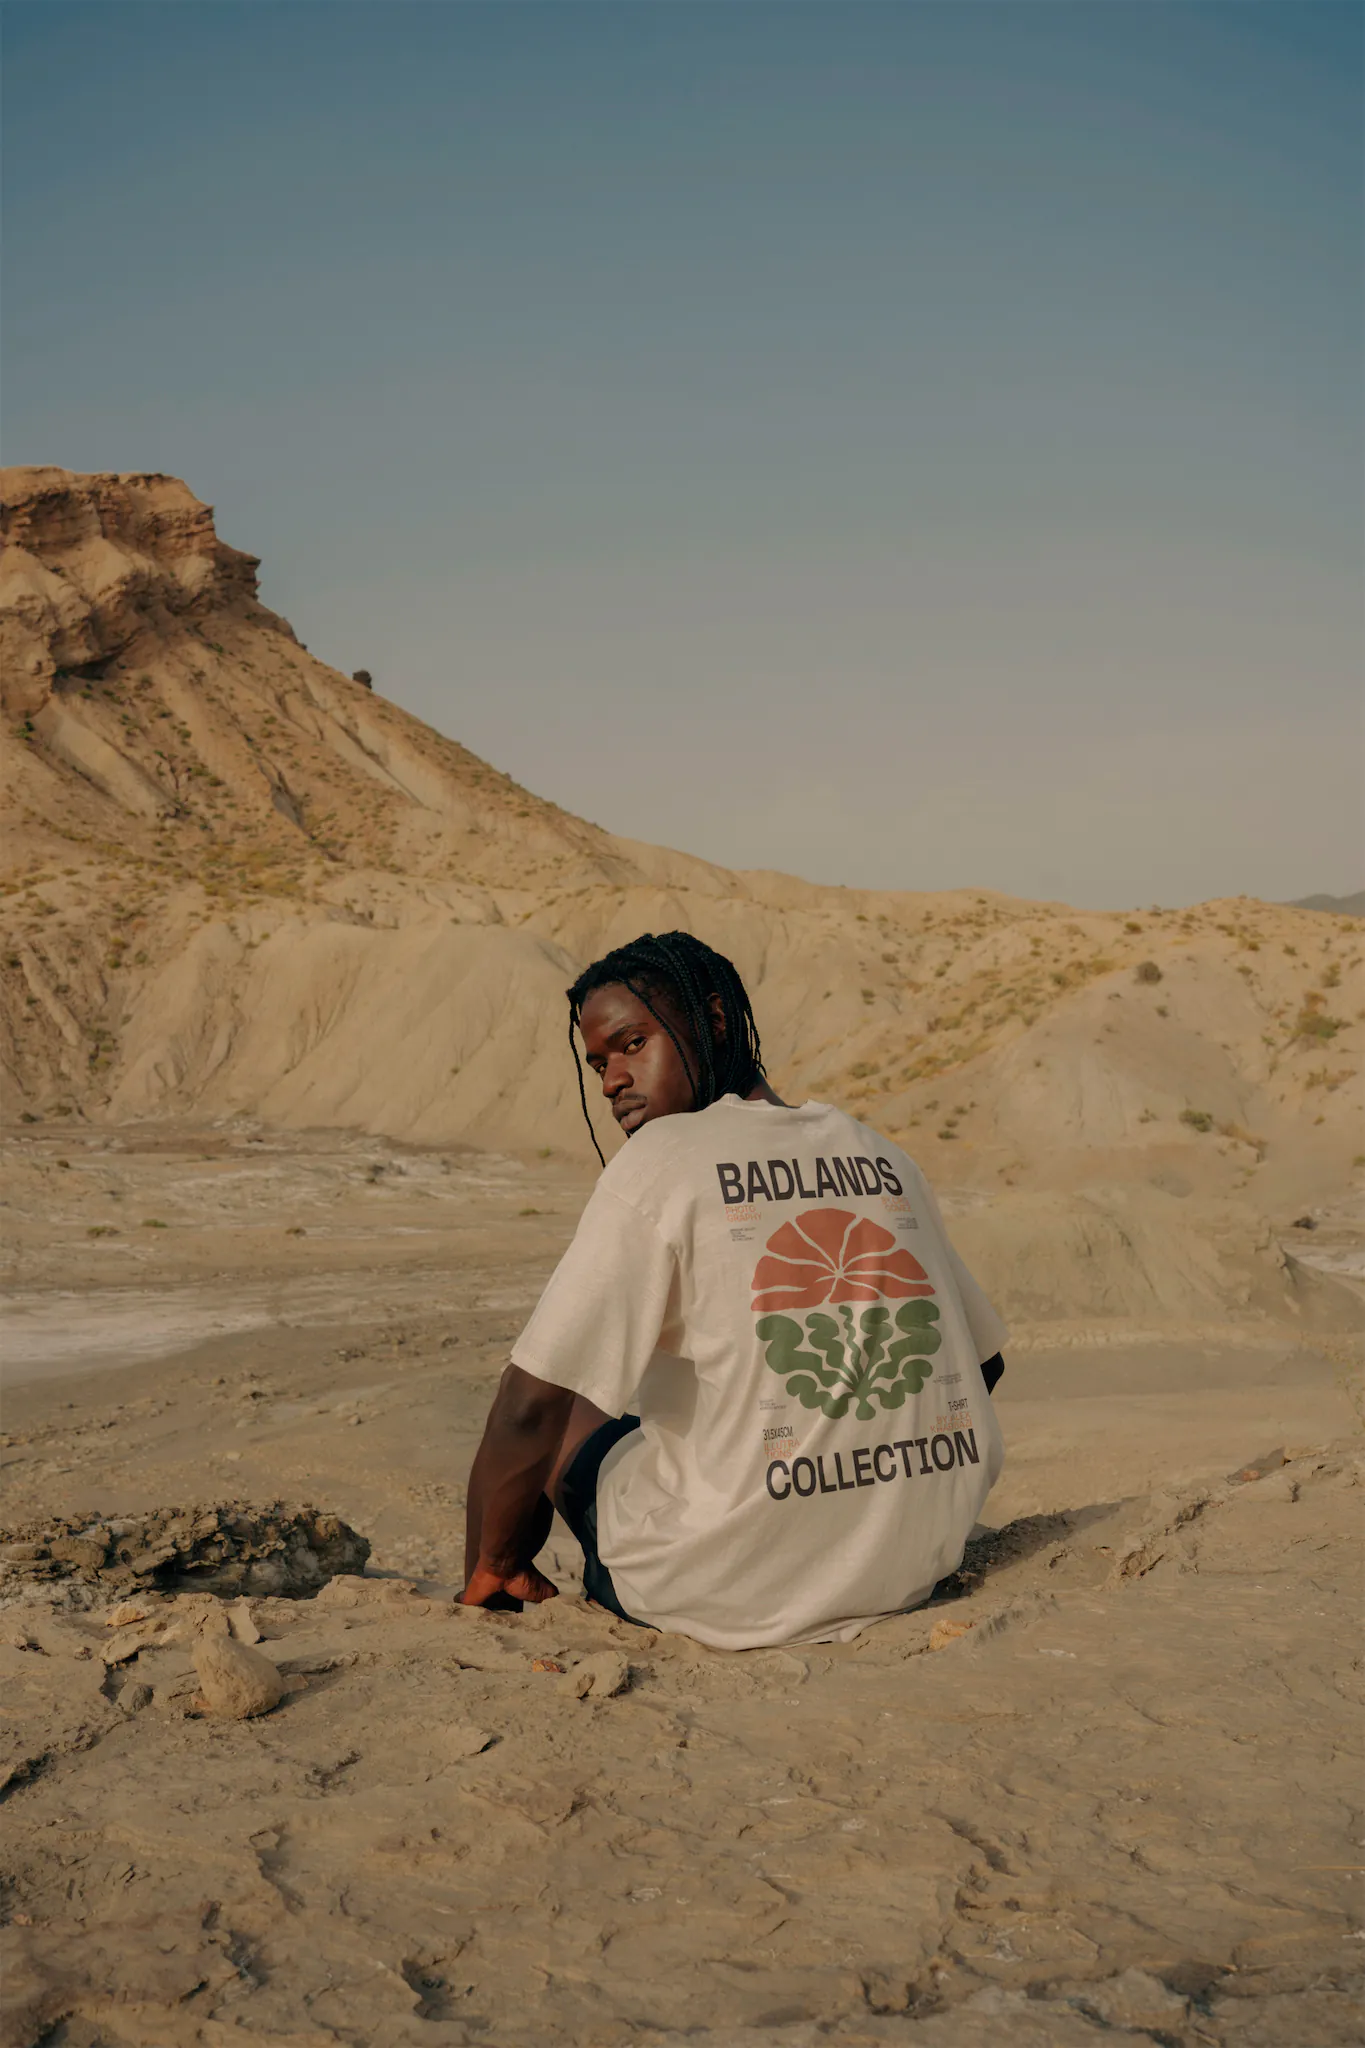 Black guy from behind sitting and wearing a t-shirt mock-up in a desert environment